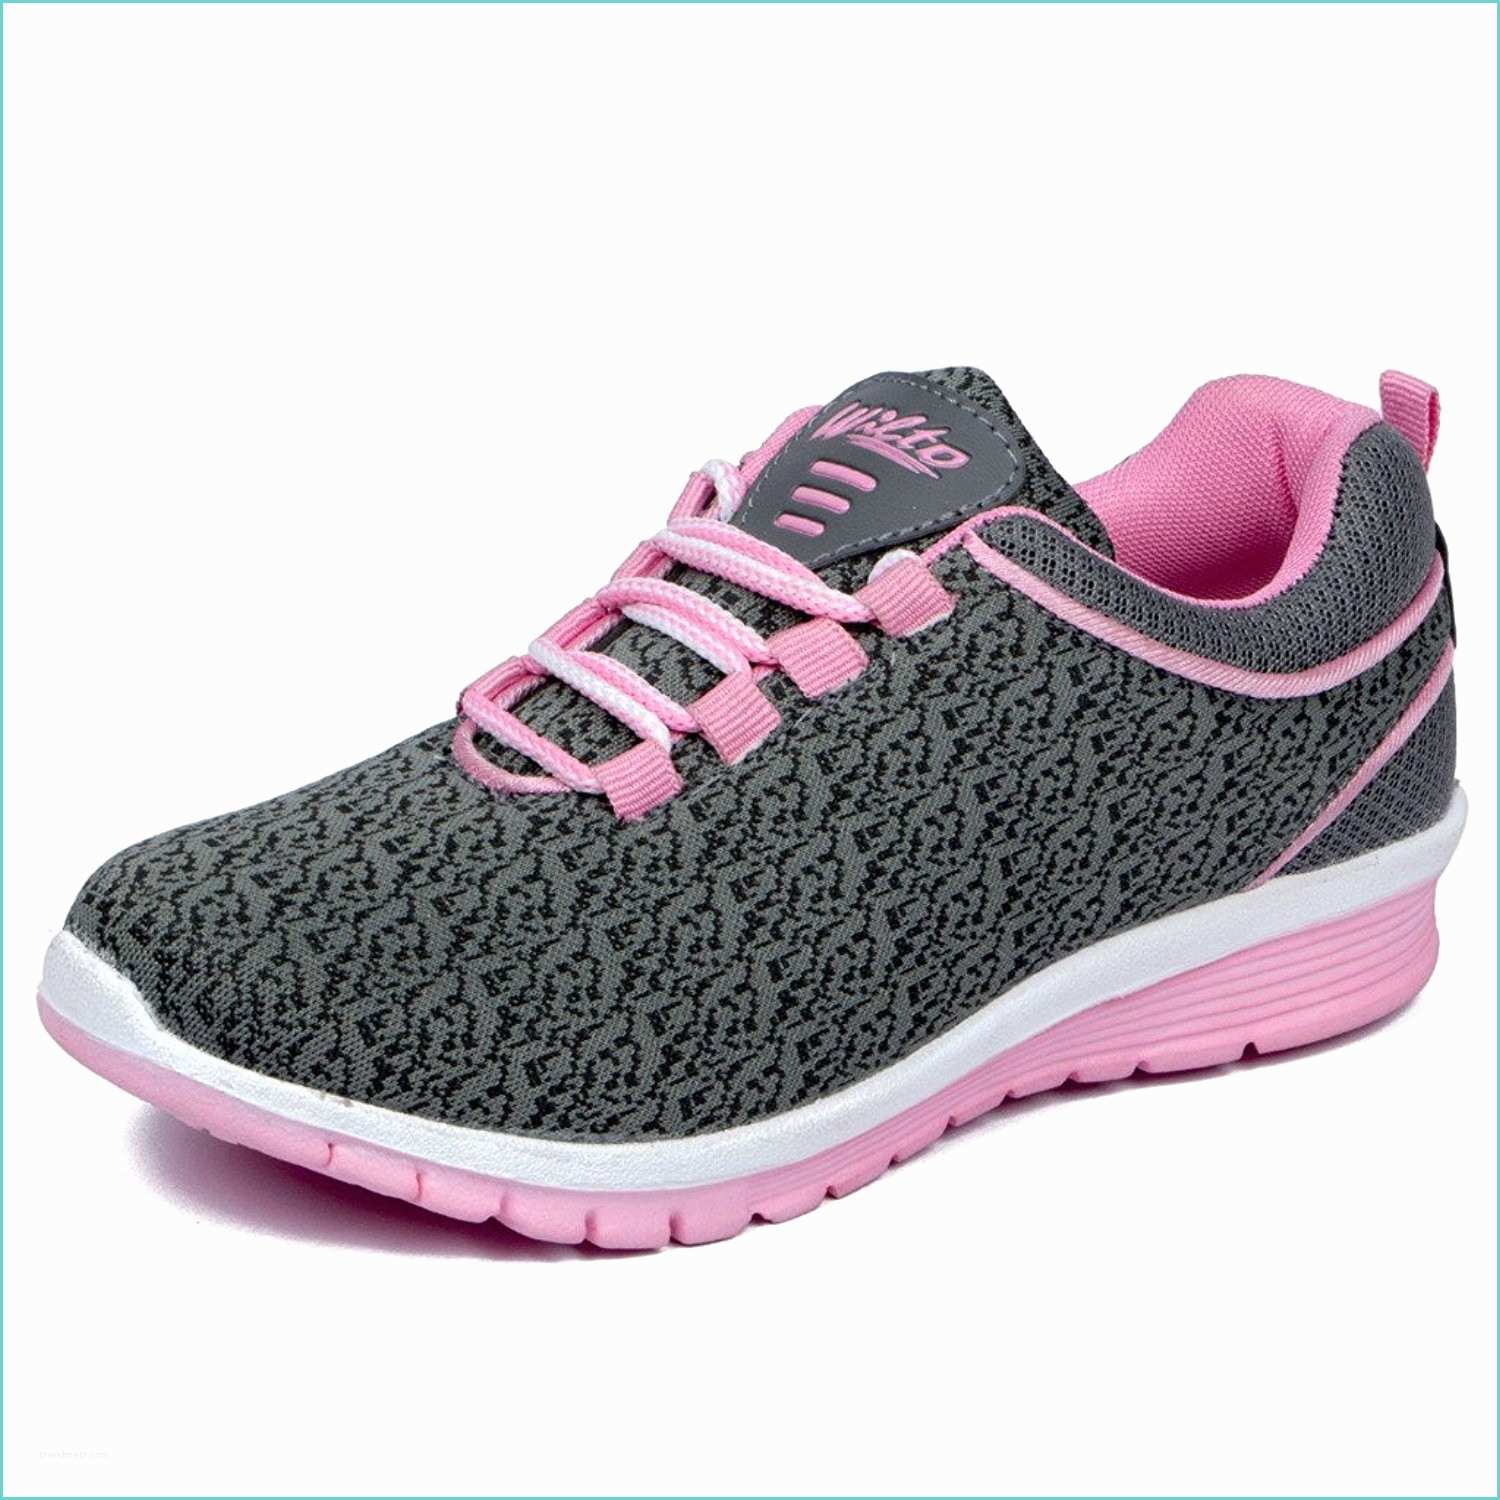 Total Sports Shoes Women S Golf Shoes Puma Golf Avec total Sports Sneakers